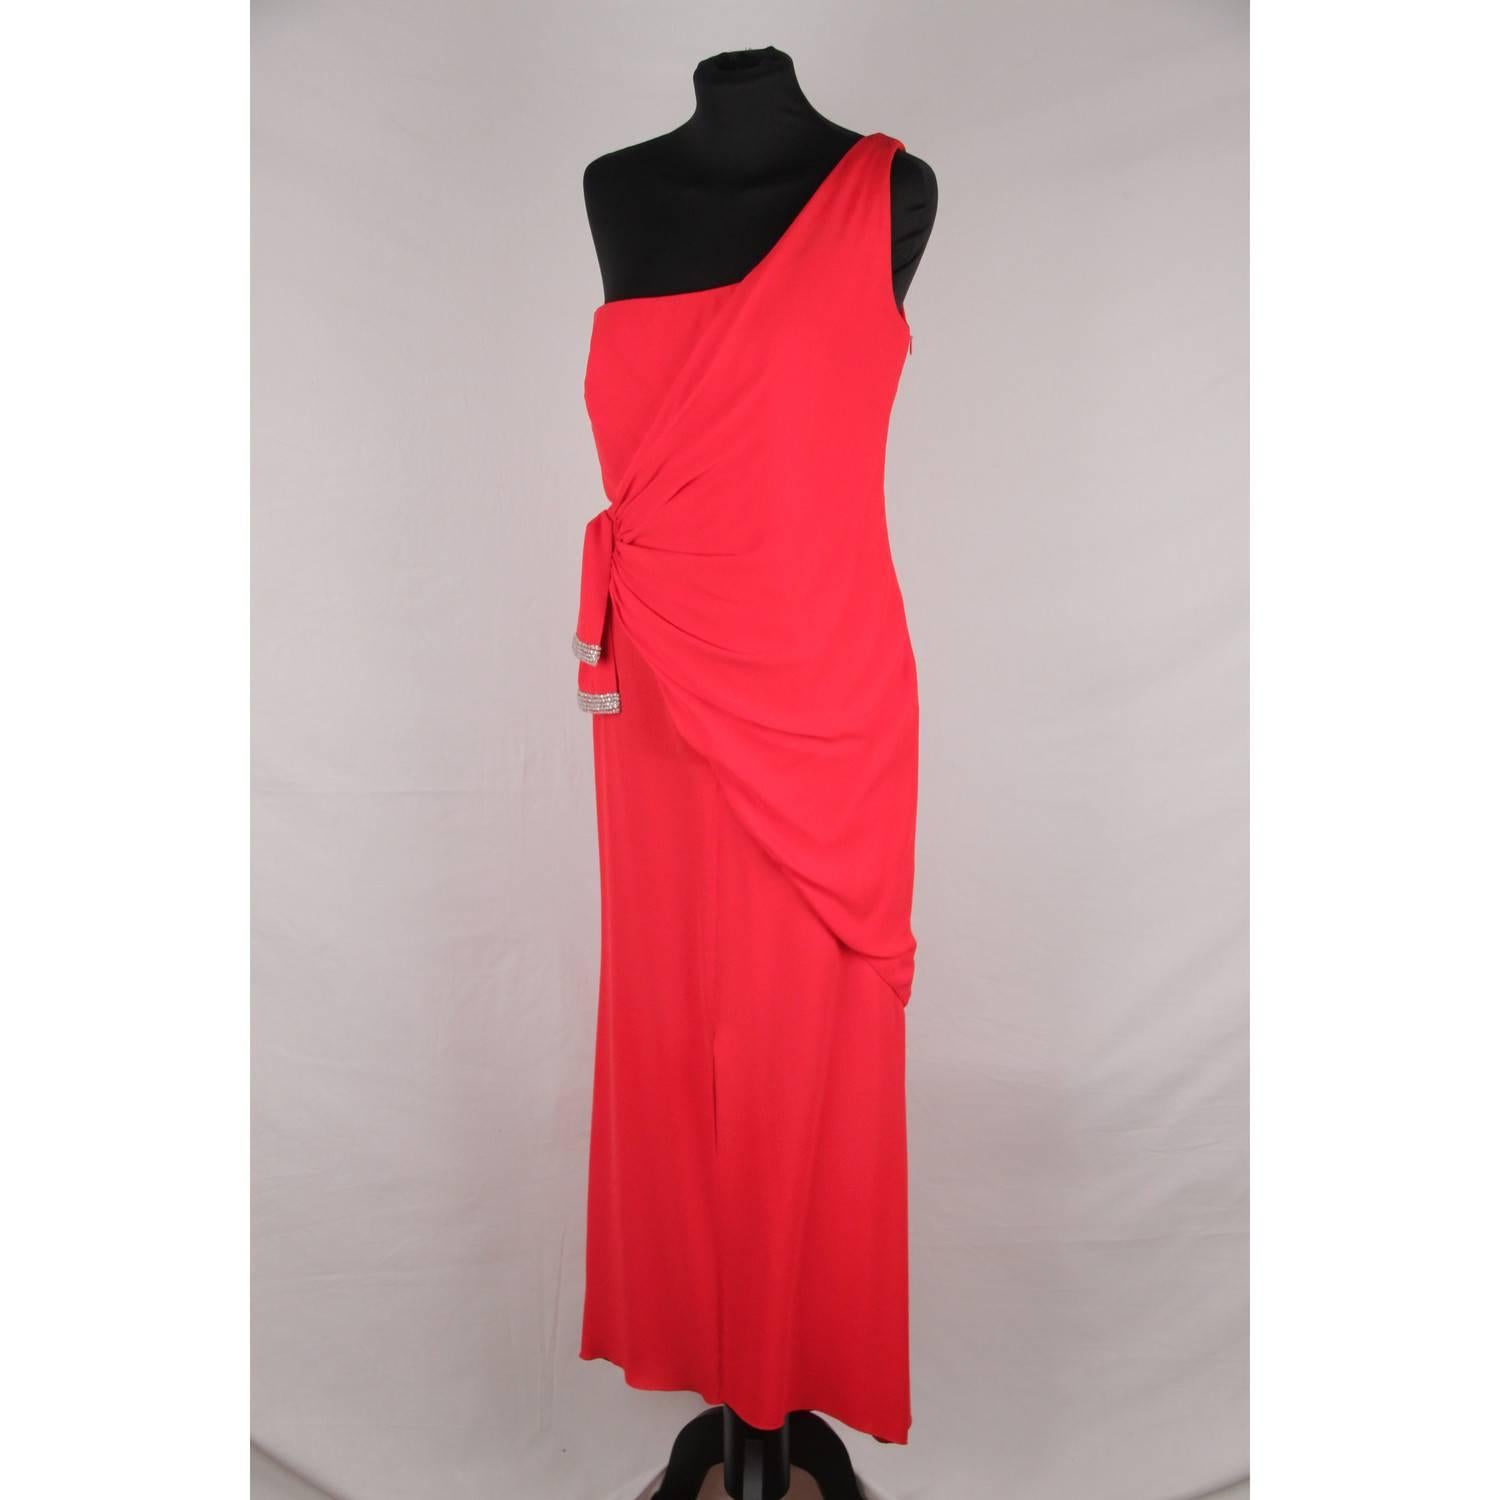 VALENTINO Red Chiffon ONE SHOULDER EVENING Gown DRESS Gown 2